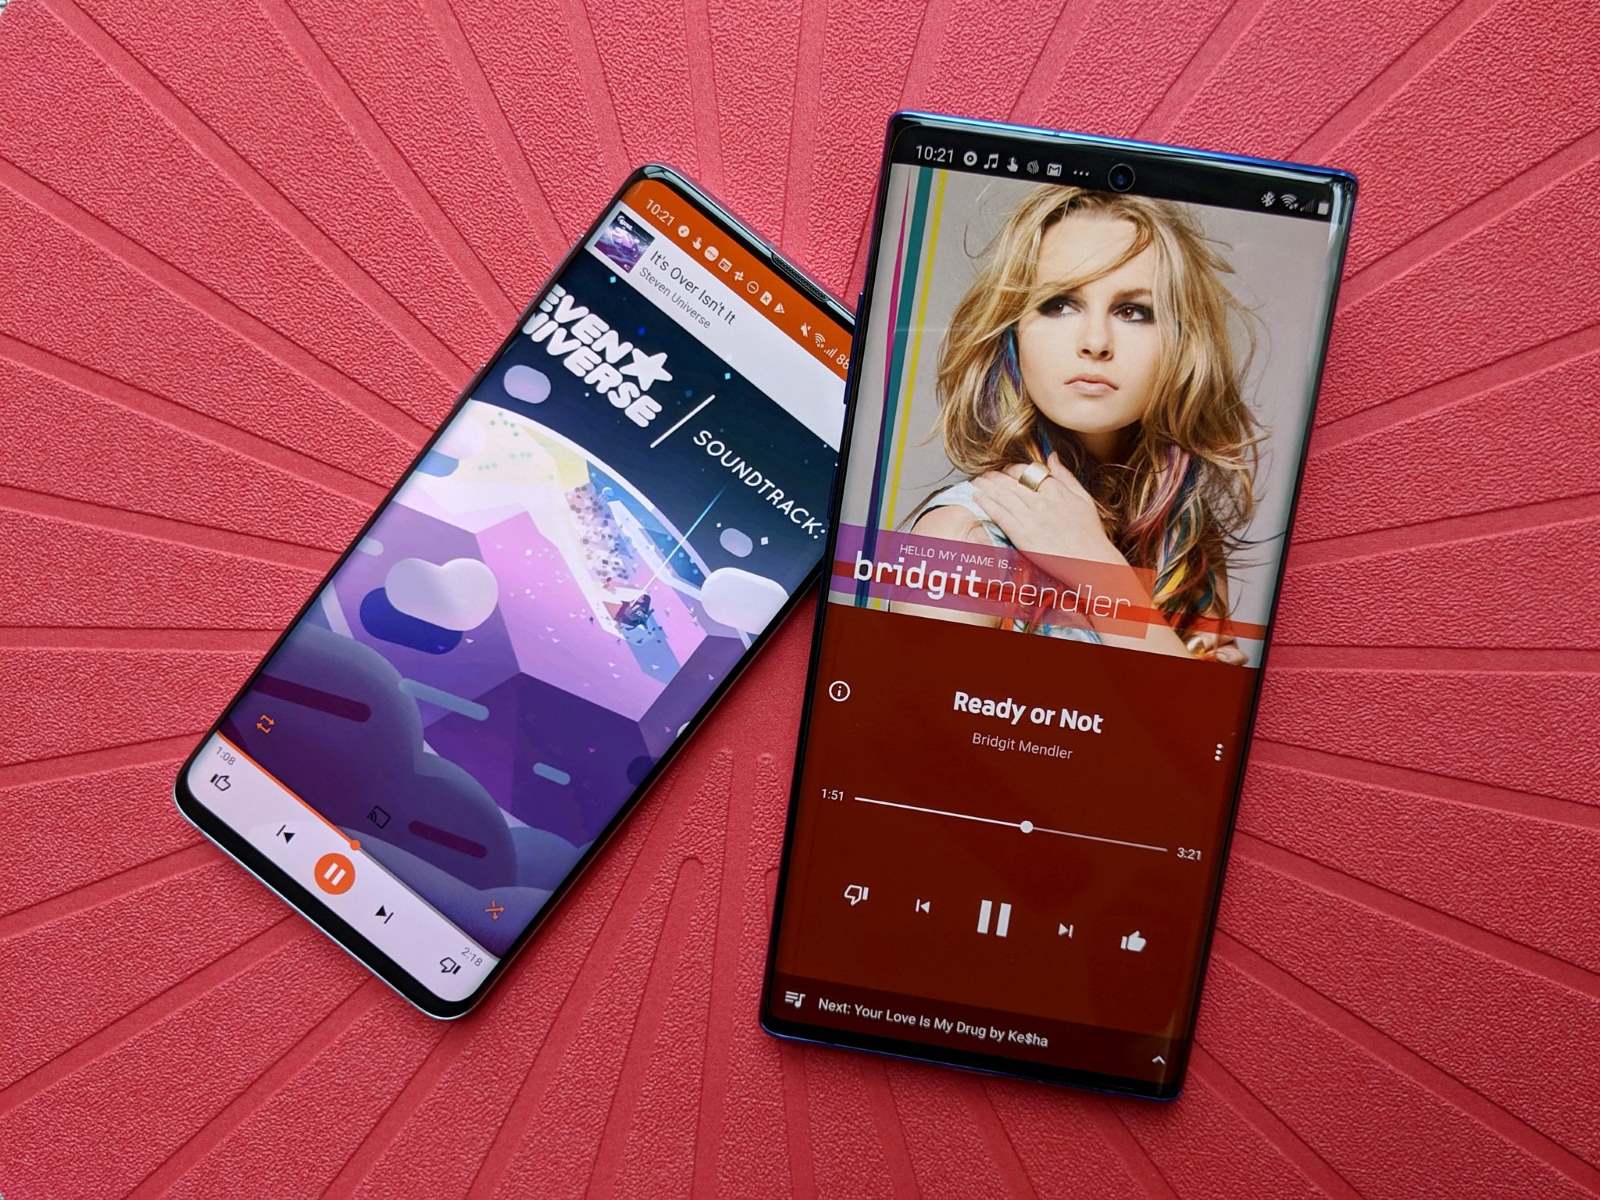 How To Add Album Art To Google Play Music App On Android